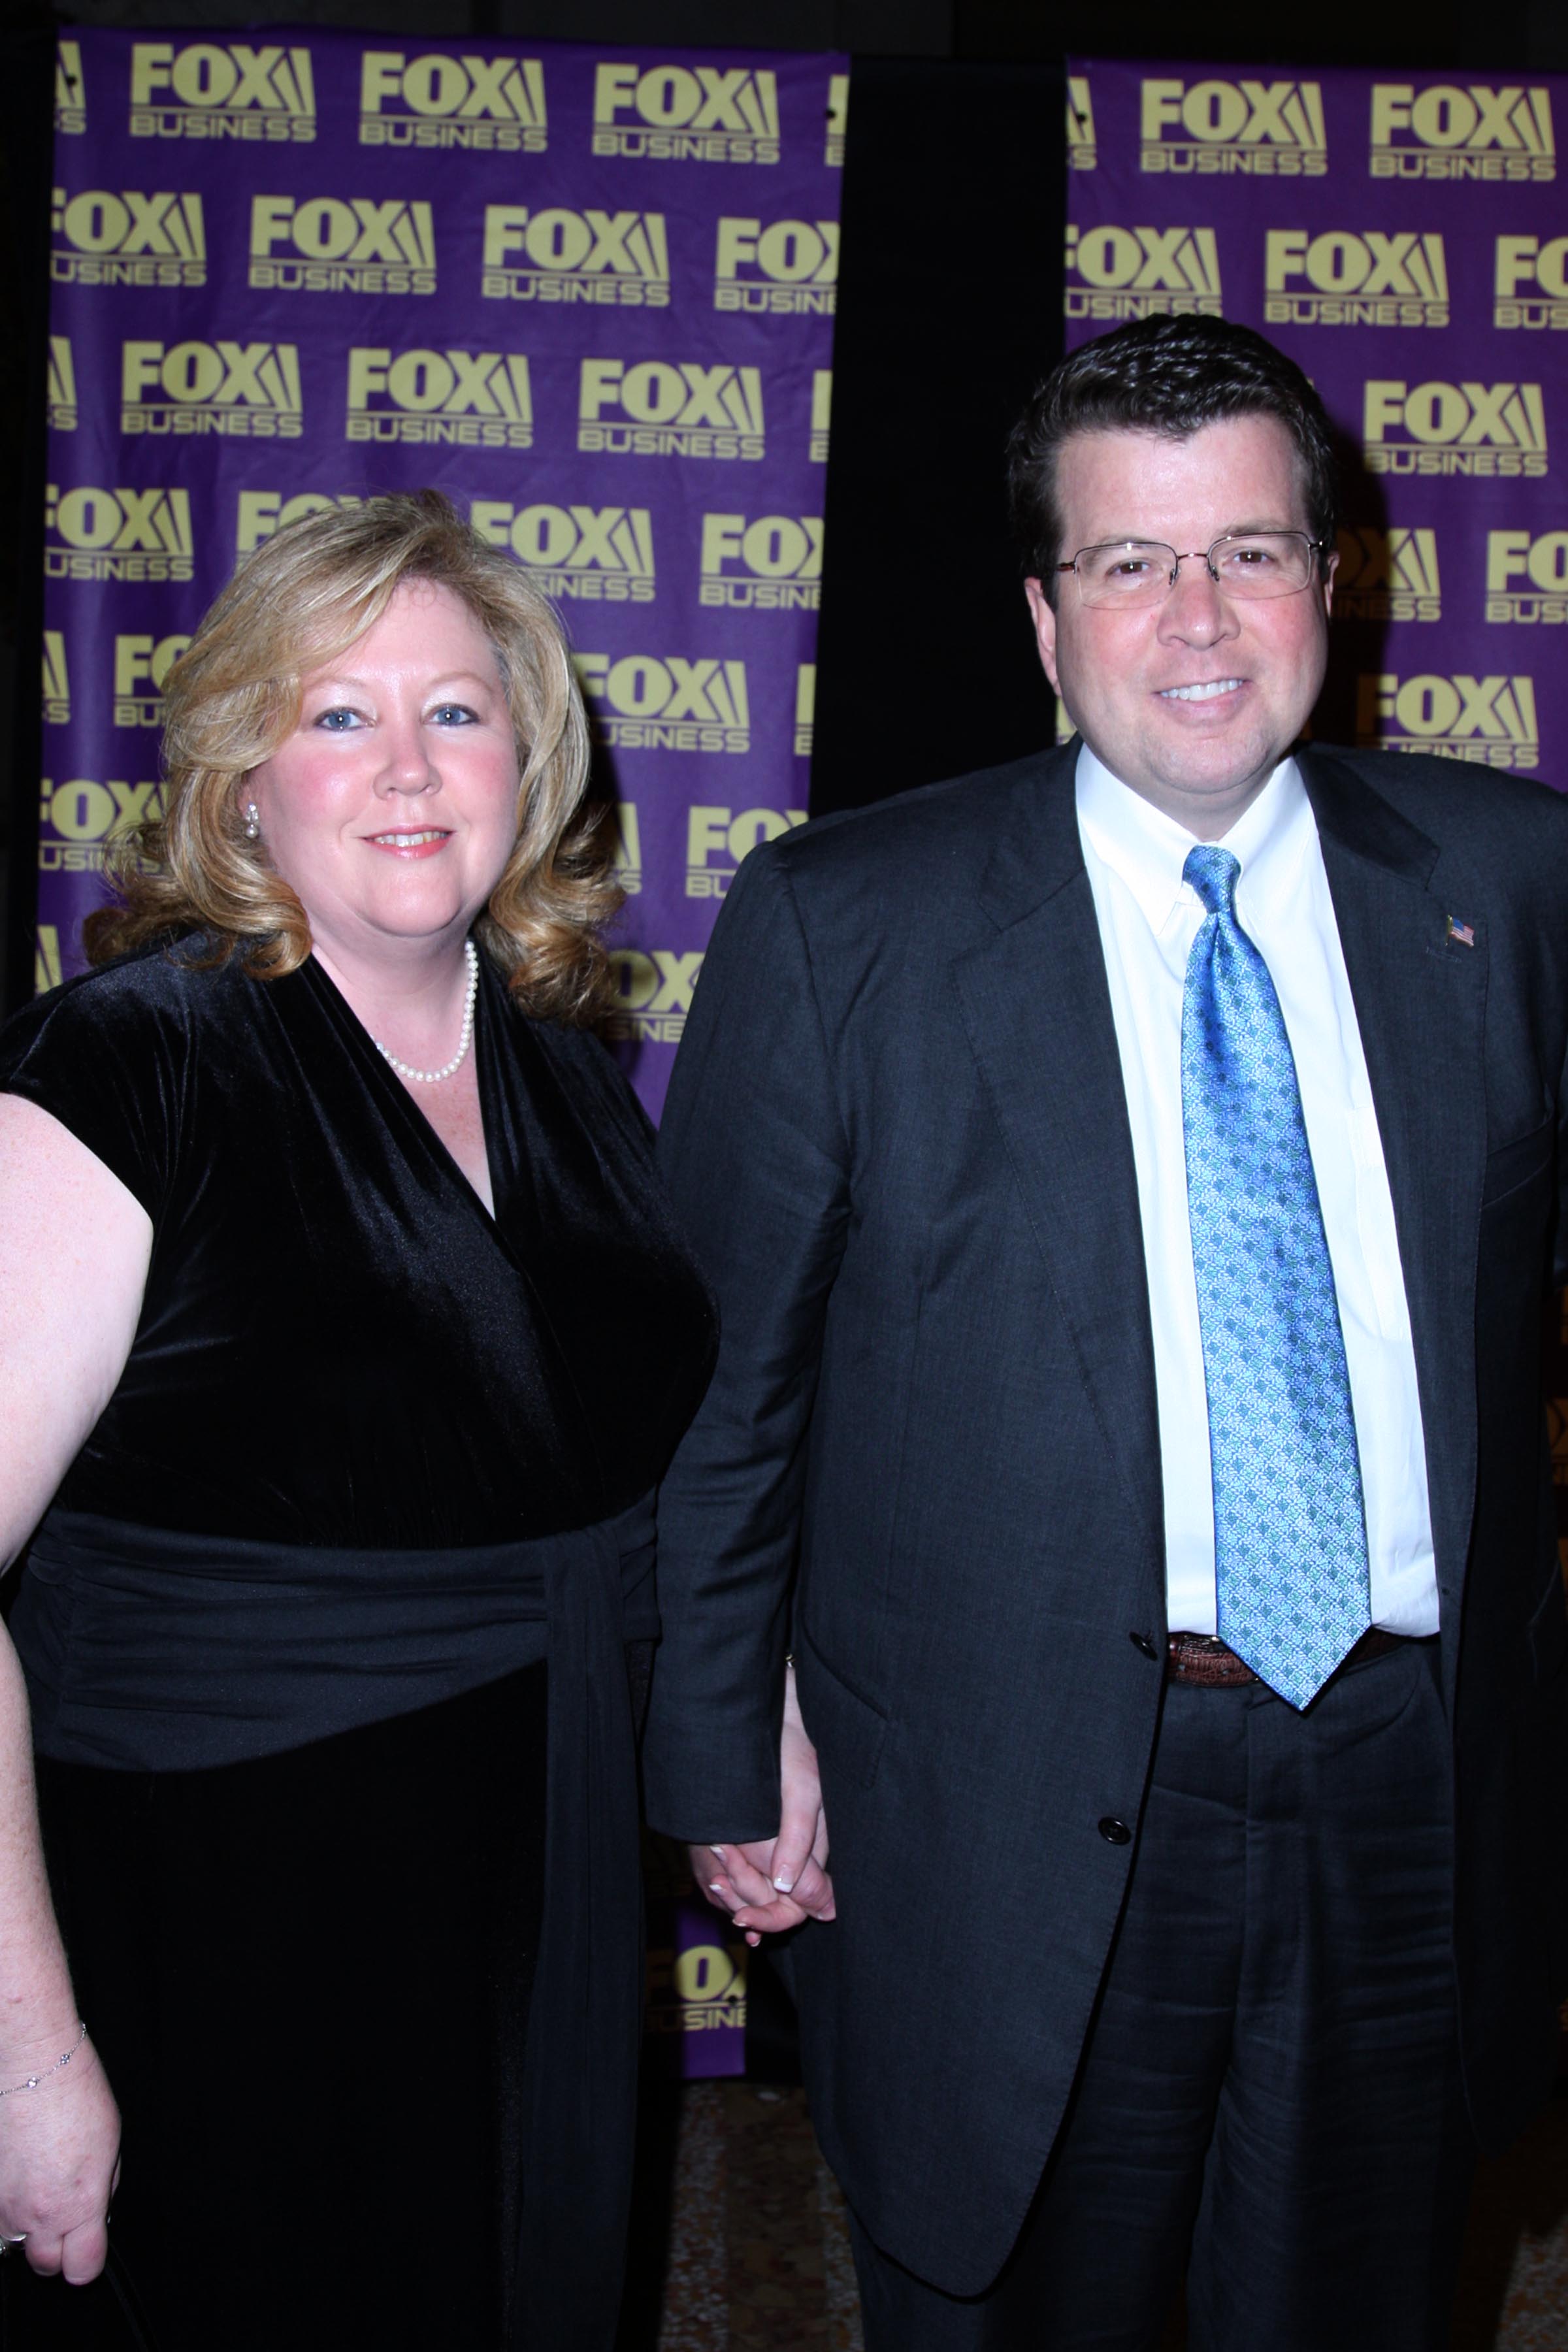 Mary Cavuto and Neil Cavuto attend A Celebration for the Launch of THE FOX BUSINESS NETWORK at Temple of Dendur on October 24, 2007 in New York City. | Photo: Getty Images